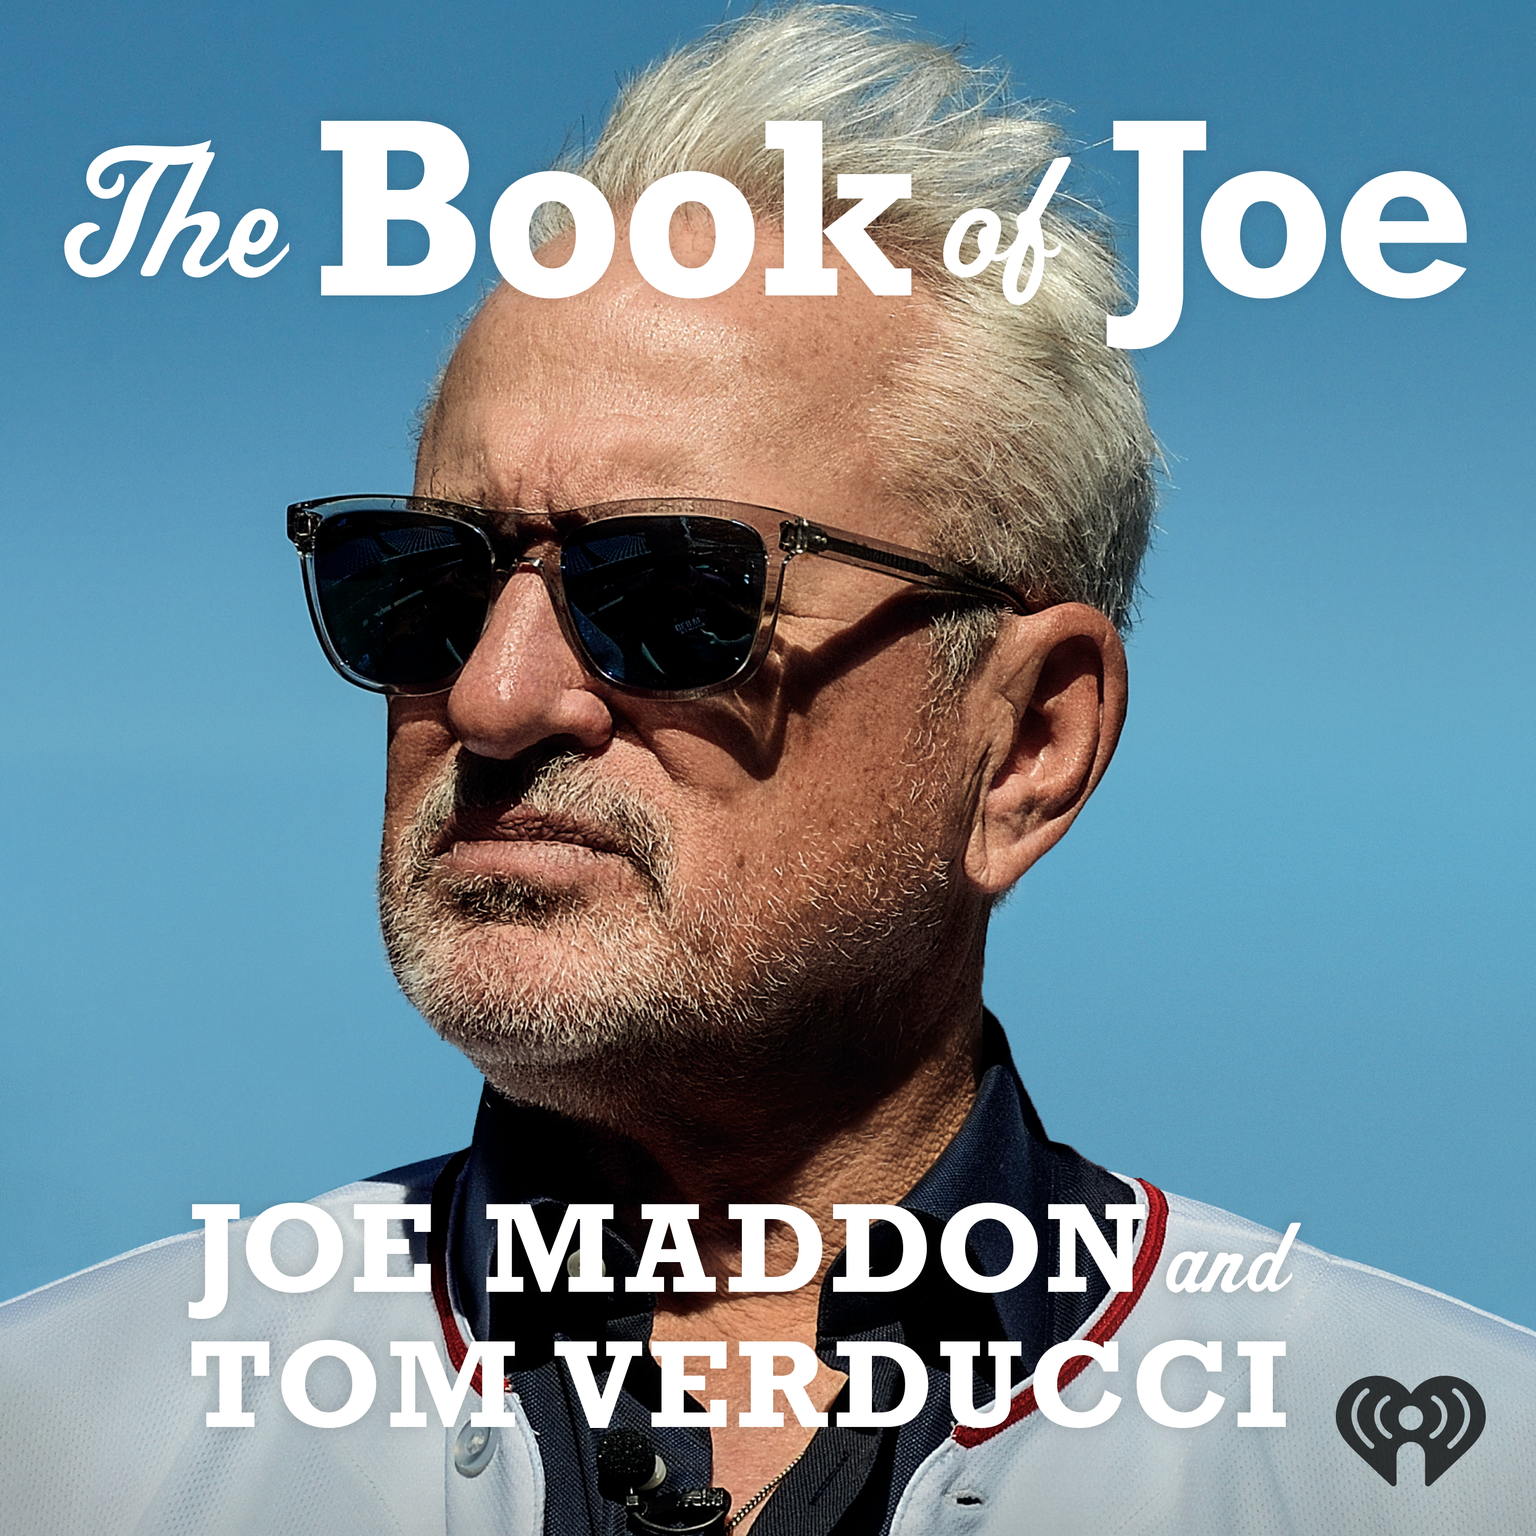 Book of Joe: AL MVP, Ohtani props, Experienced Managers, Astros future, and Glue Guys